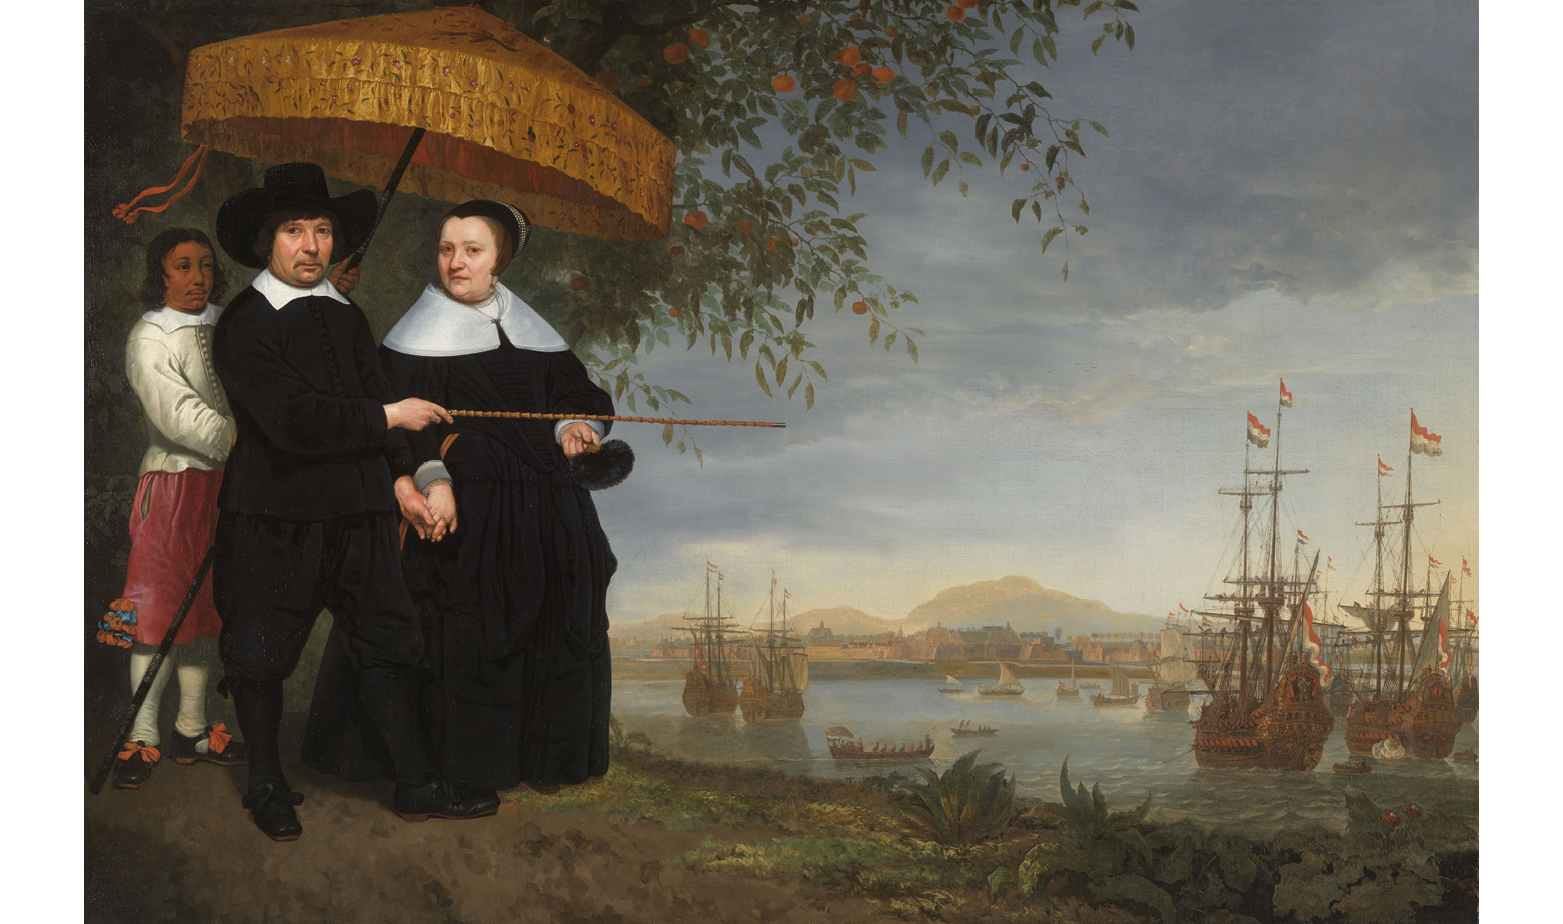 A painting c. 1650-1655: a merchant with his wife and slave overlook a bay full of Dutch ships and a coastal settlement; the man points at the bay with his cane with his right hand while holding the womanâ€™s hand with his left; the slave holds a large golden umbrella over the couple.